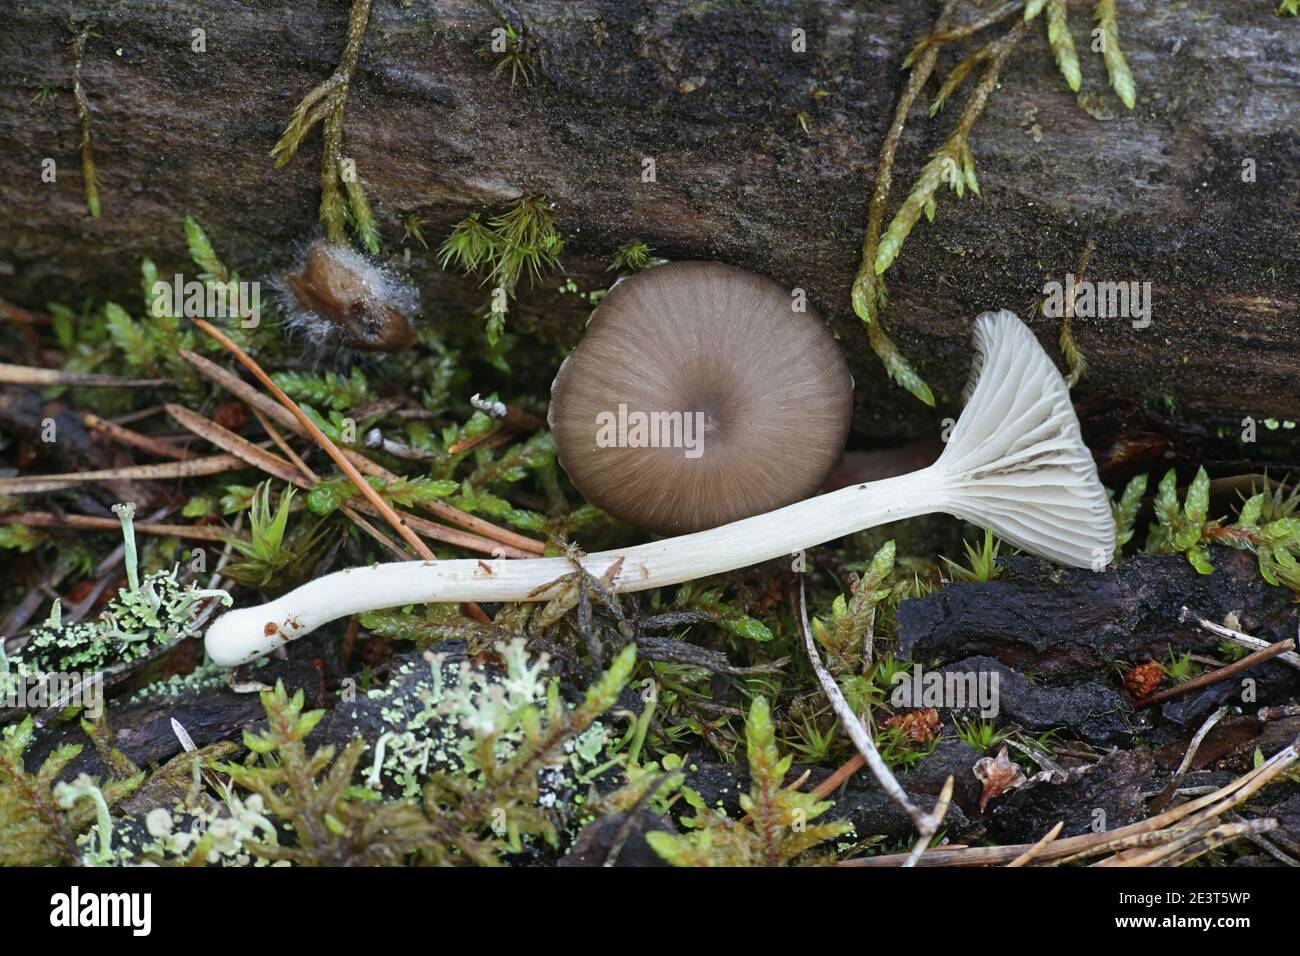 Arrhenia velutipes, also known as Omphalina velutipes, a navel mushroom from Finland with no common english name Stock Photo